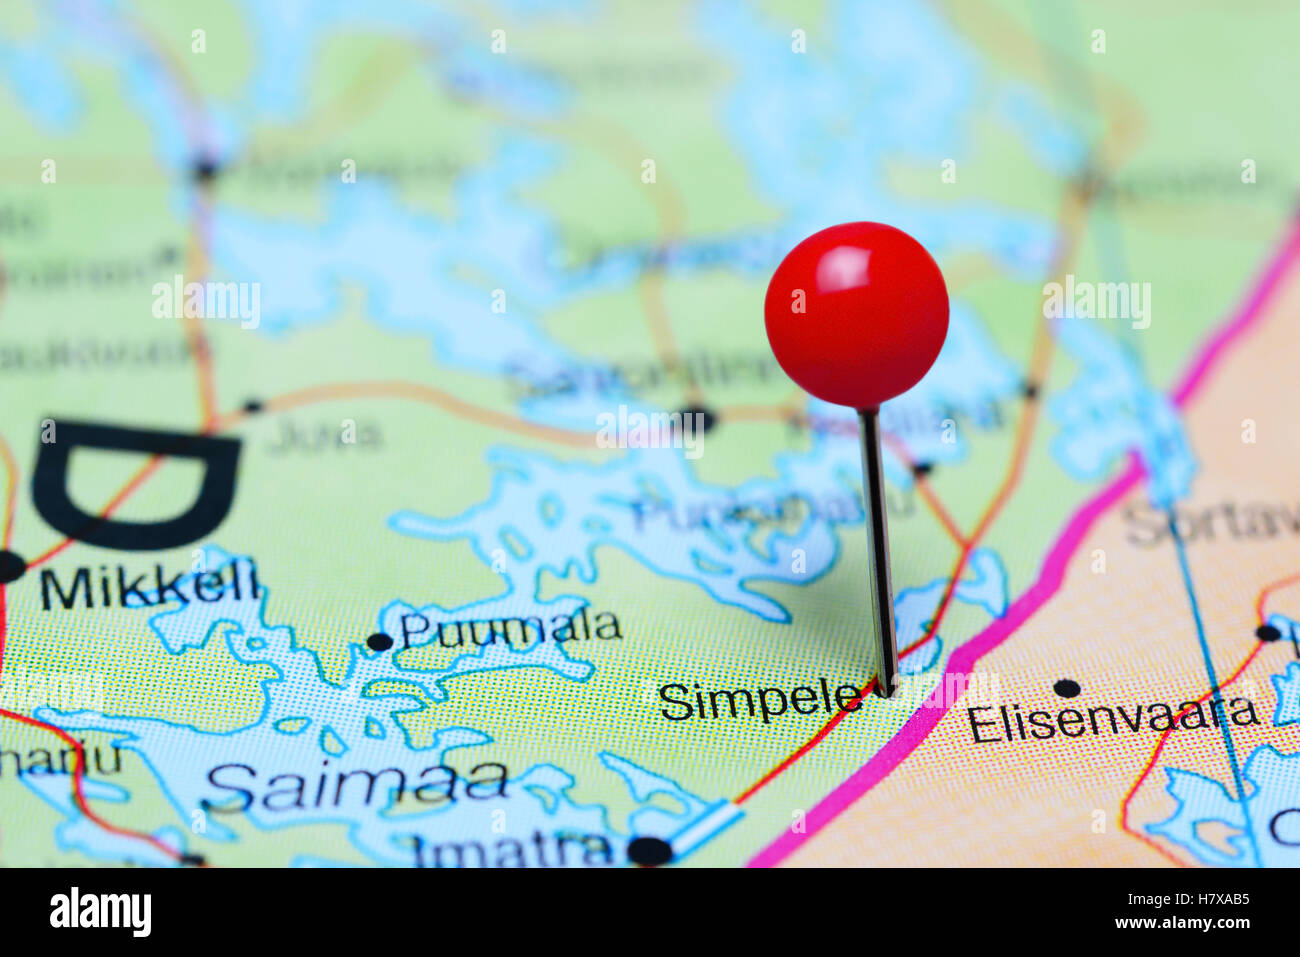 Simpele pinned on a map of Finland Stock Photo